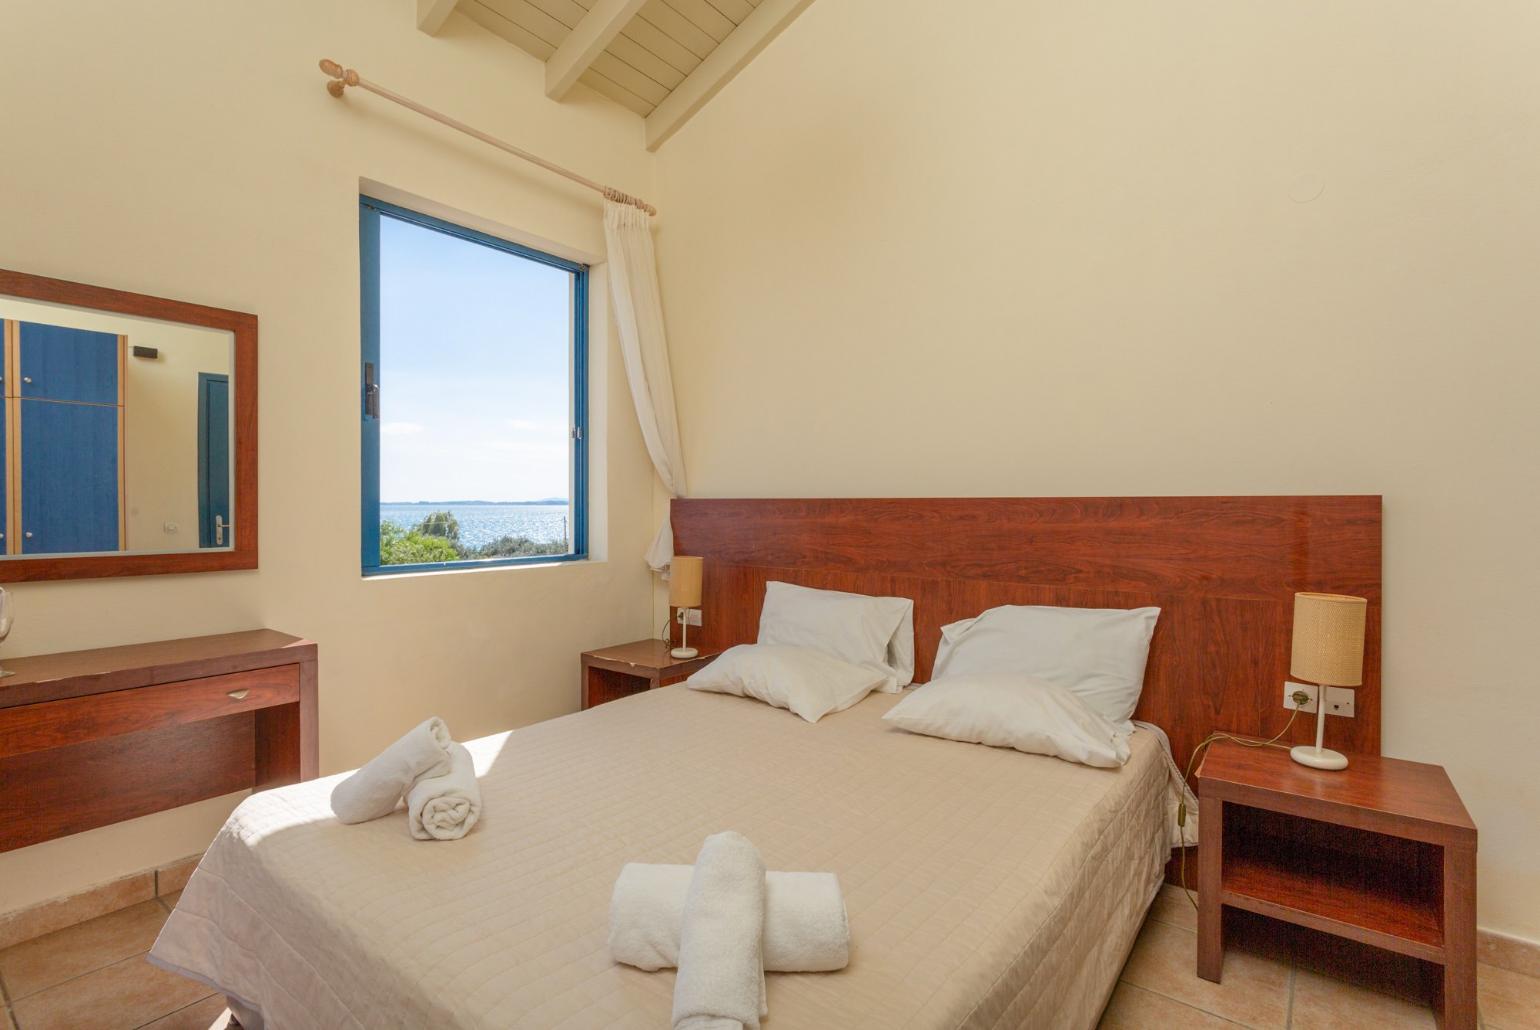 Double bedroom with A/C, TV, and balcony access with sea views